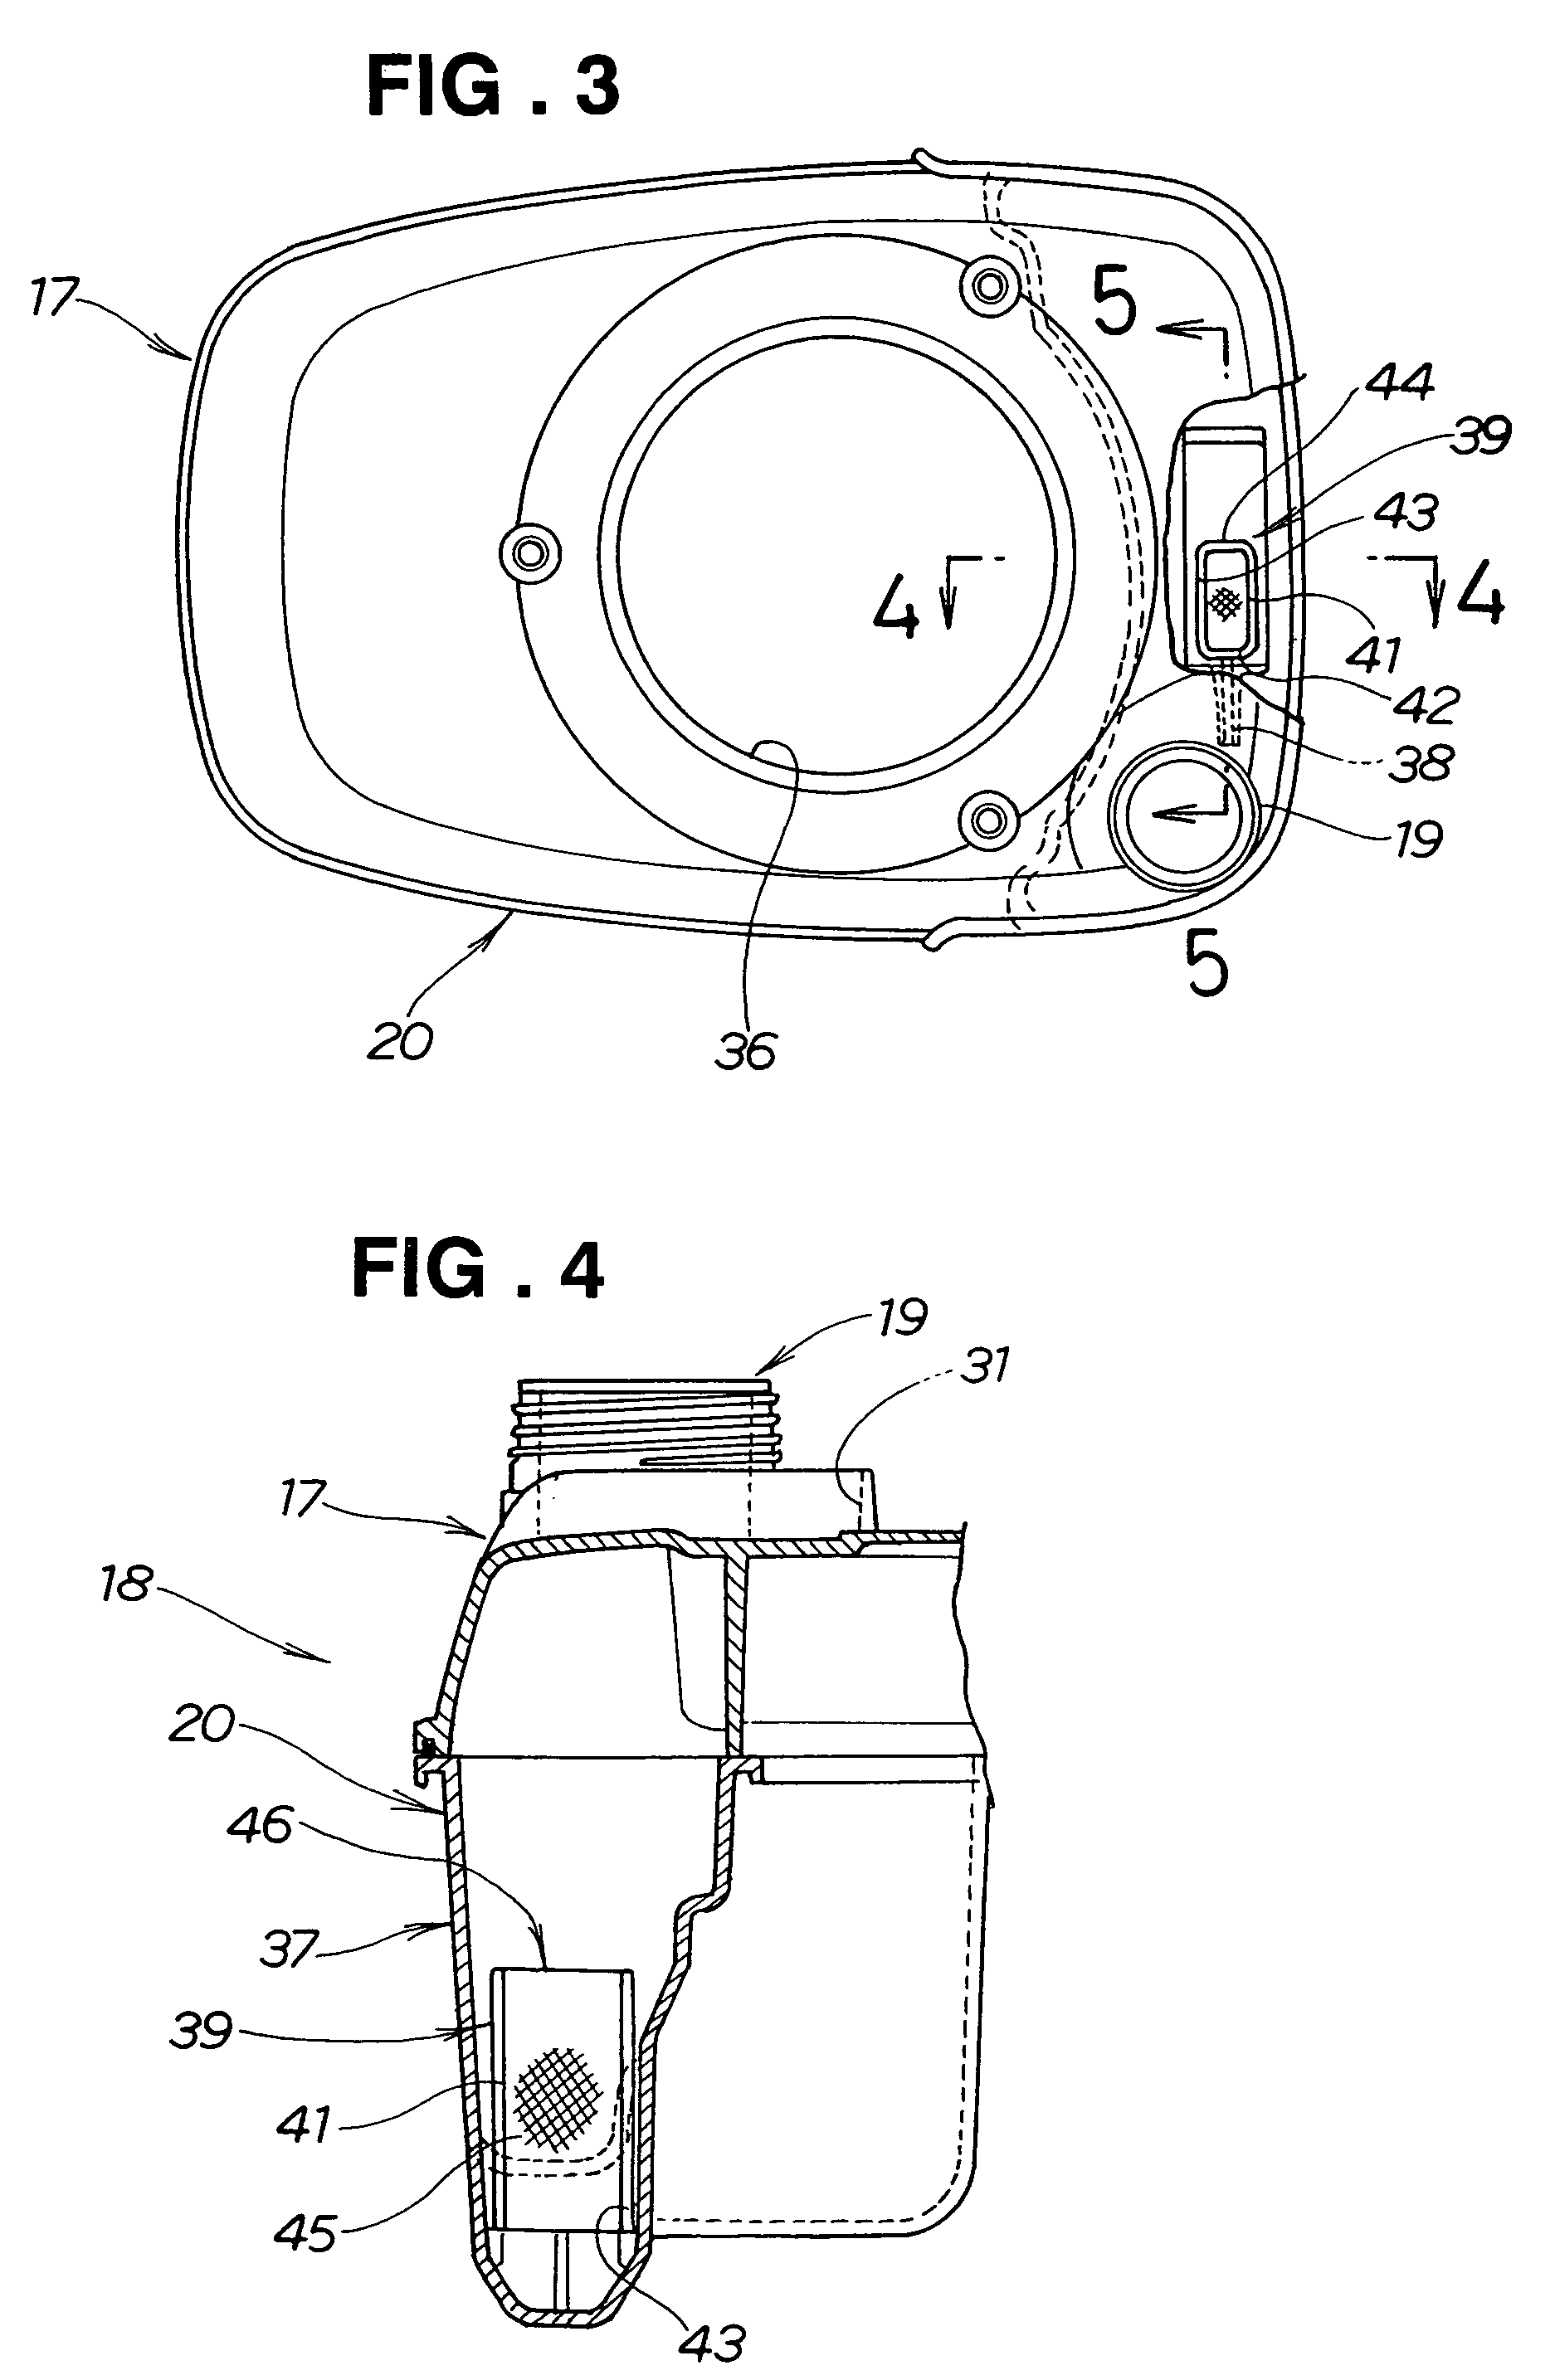 Fuel tank with filters